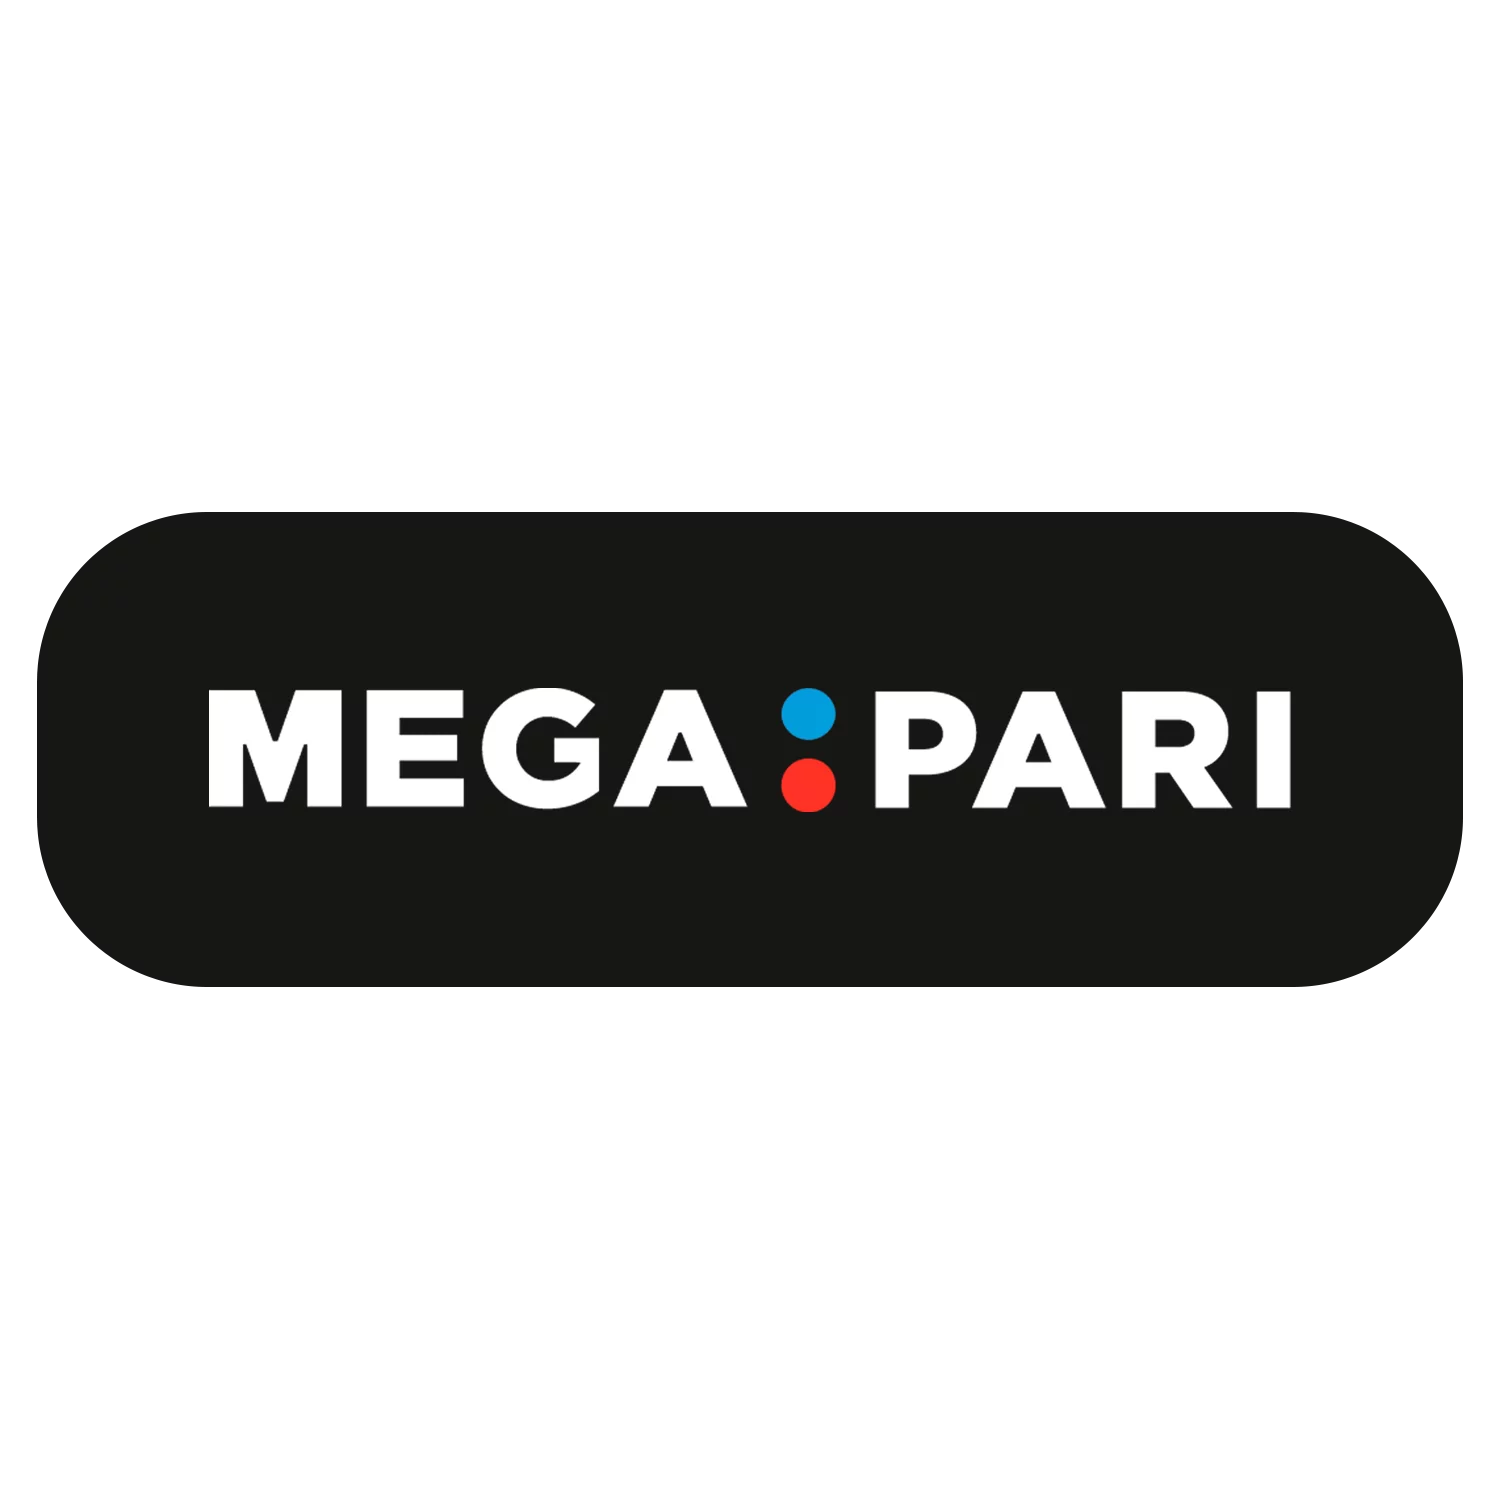 Megapari is a new bookmaker for cricket betting.